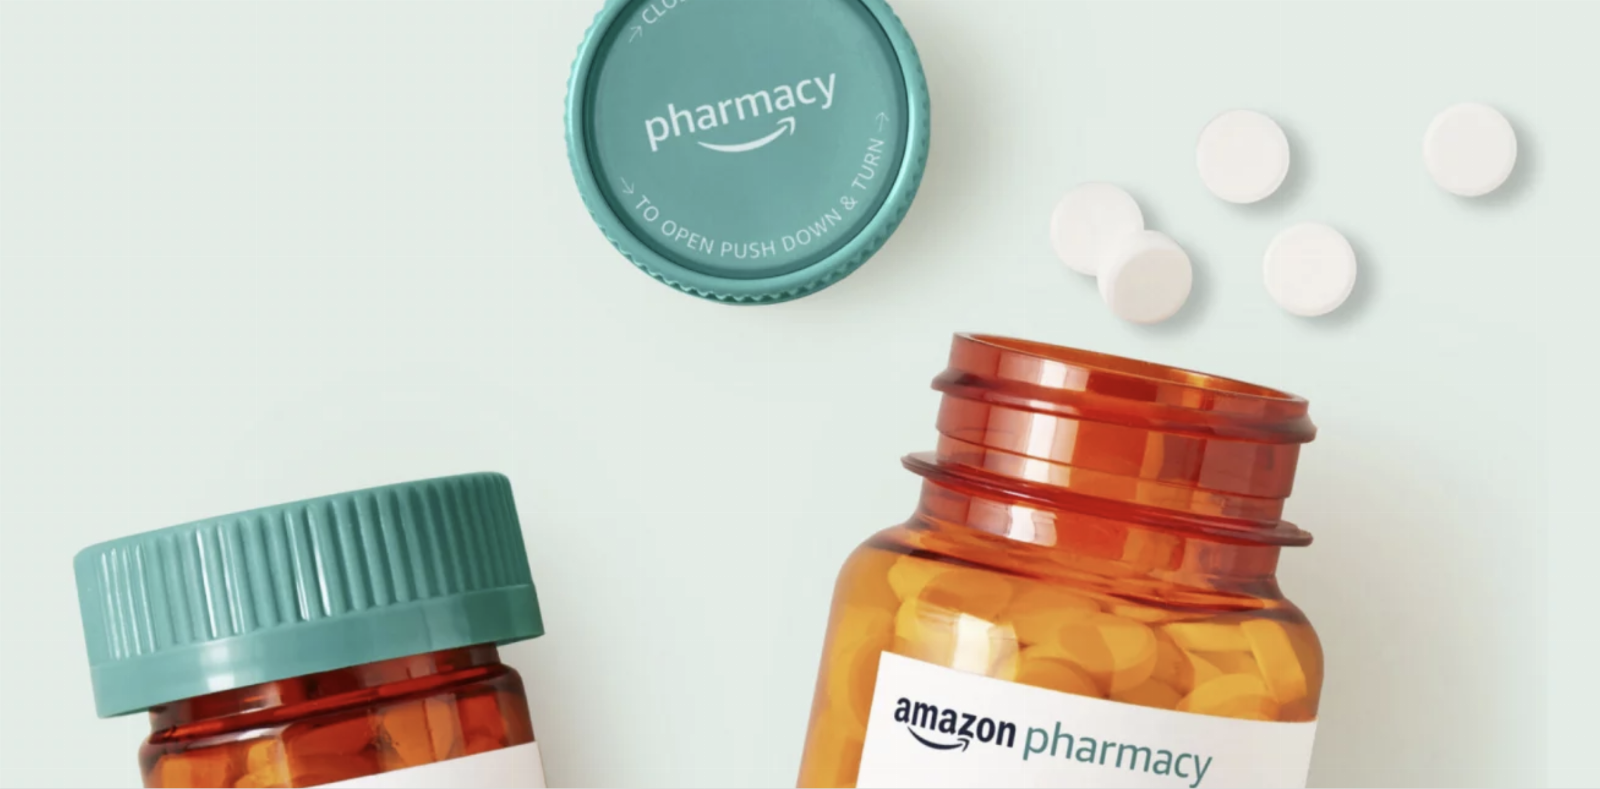 Amazon Pharmacy now automatically applies coupons on select brand name drugs